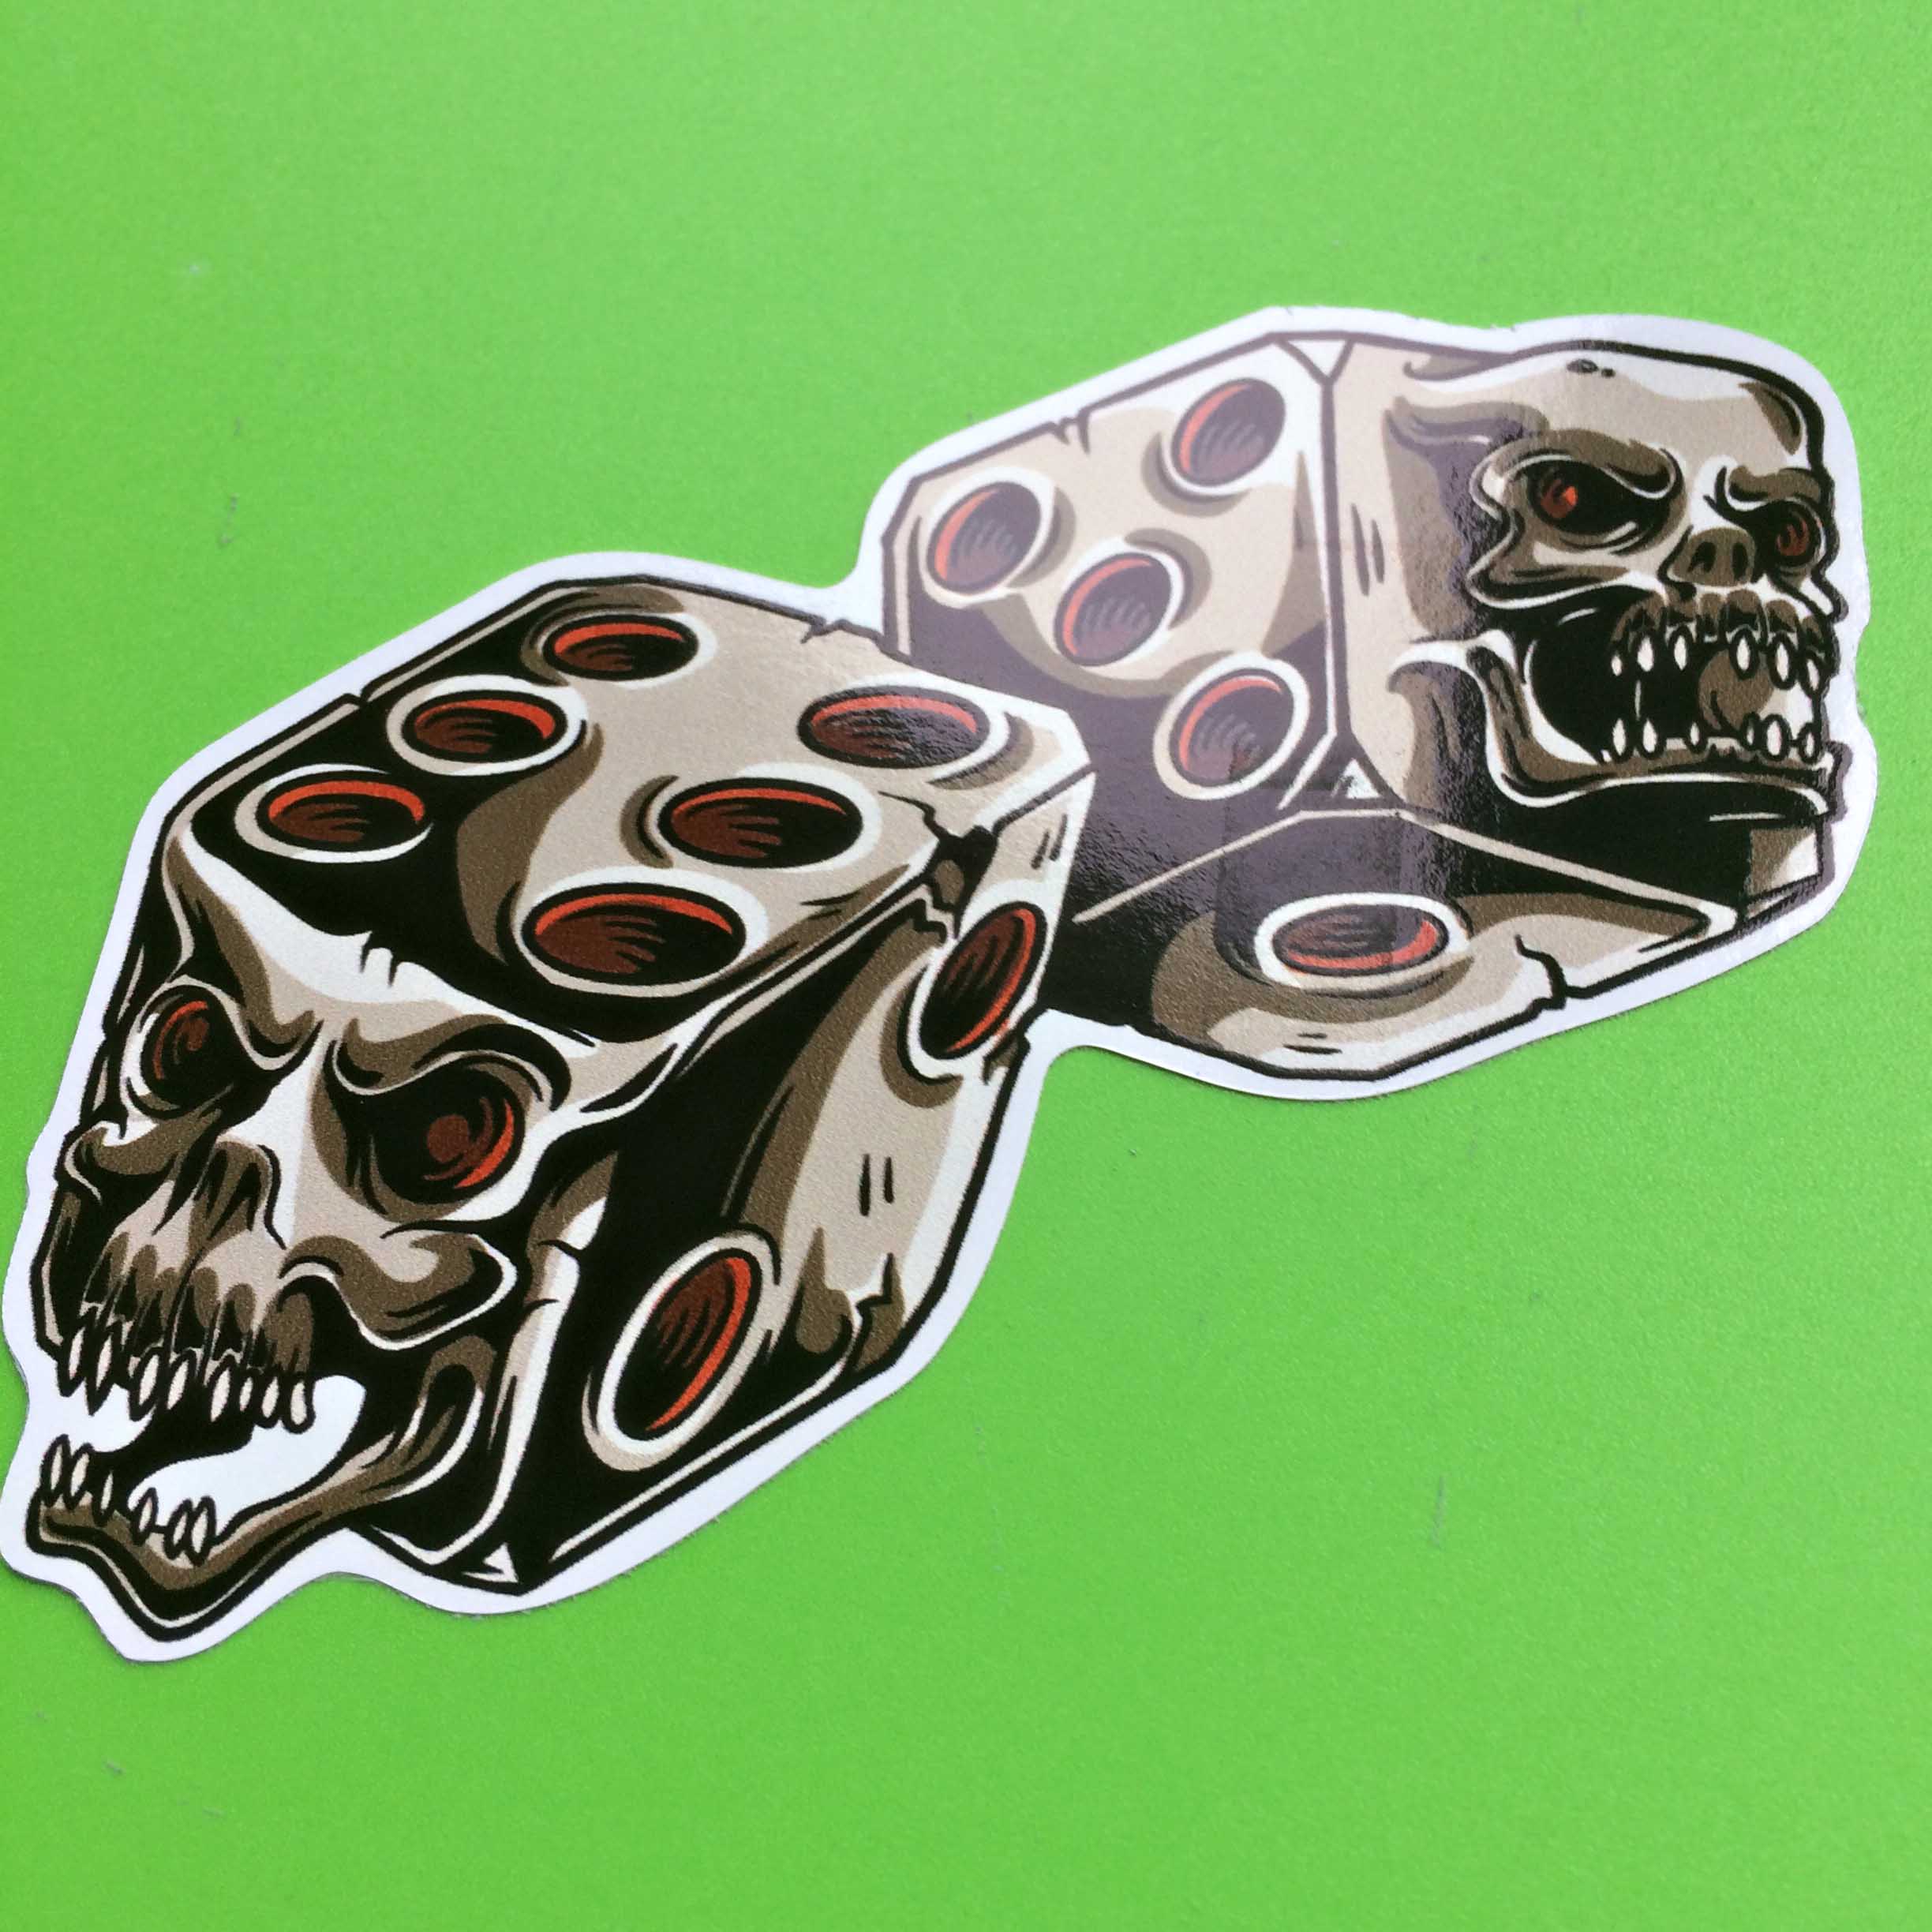 DEVILS DICE HOT ROD STICKER. Metallic looking twin dice with the dots in red. A skull with sharp teeth and red eye sockets is on the side of each dice.